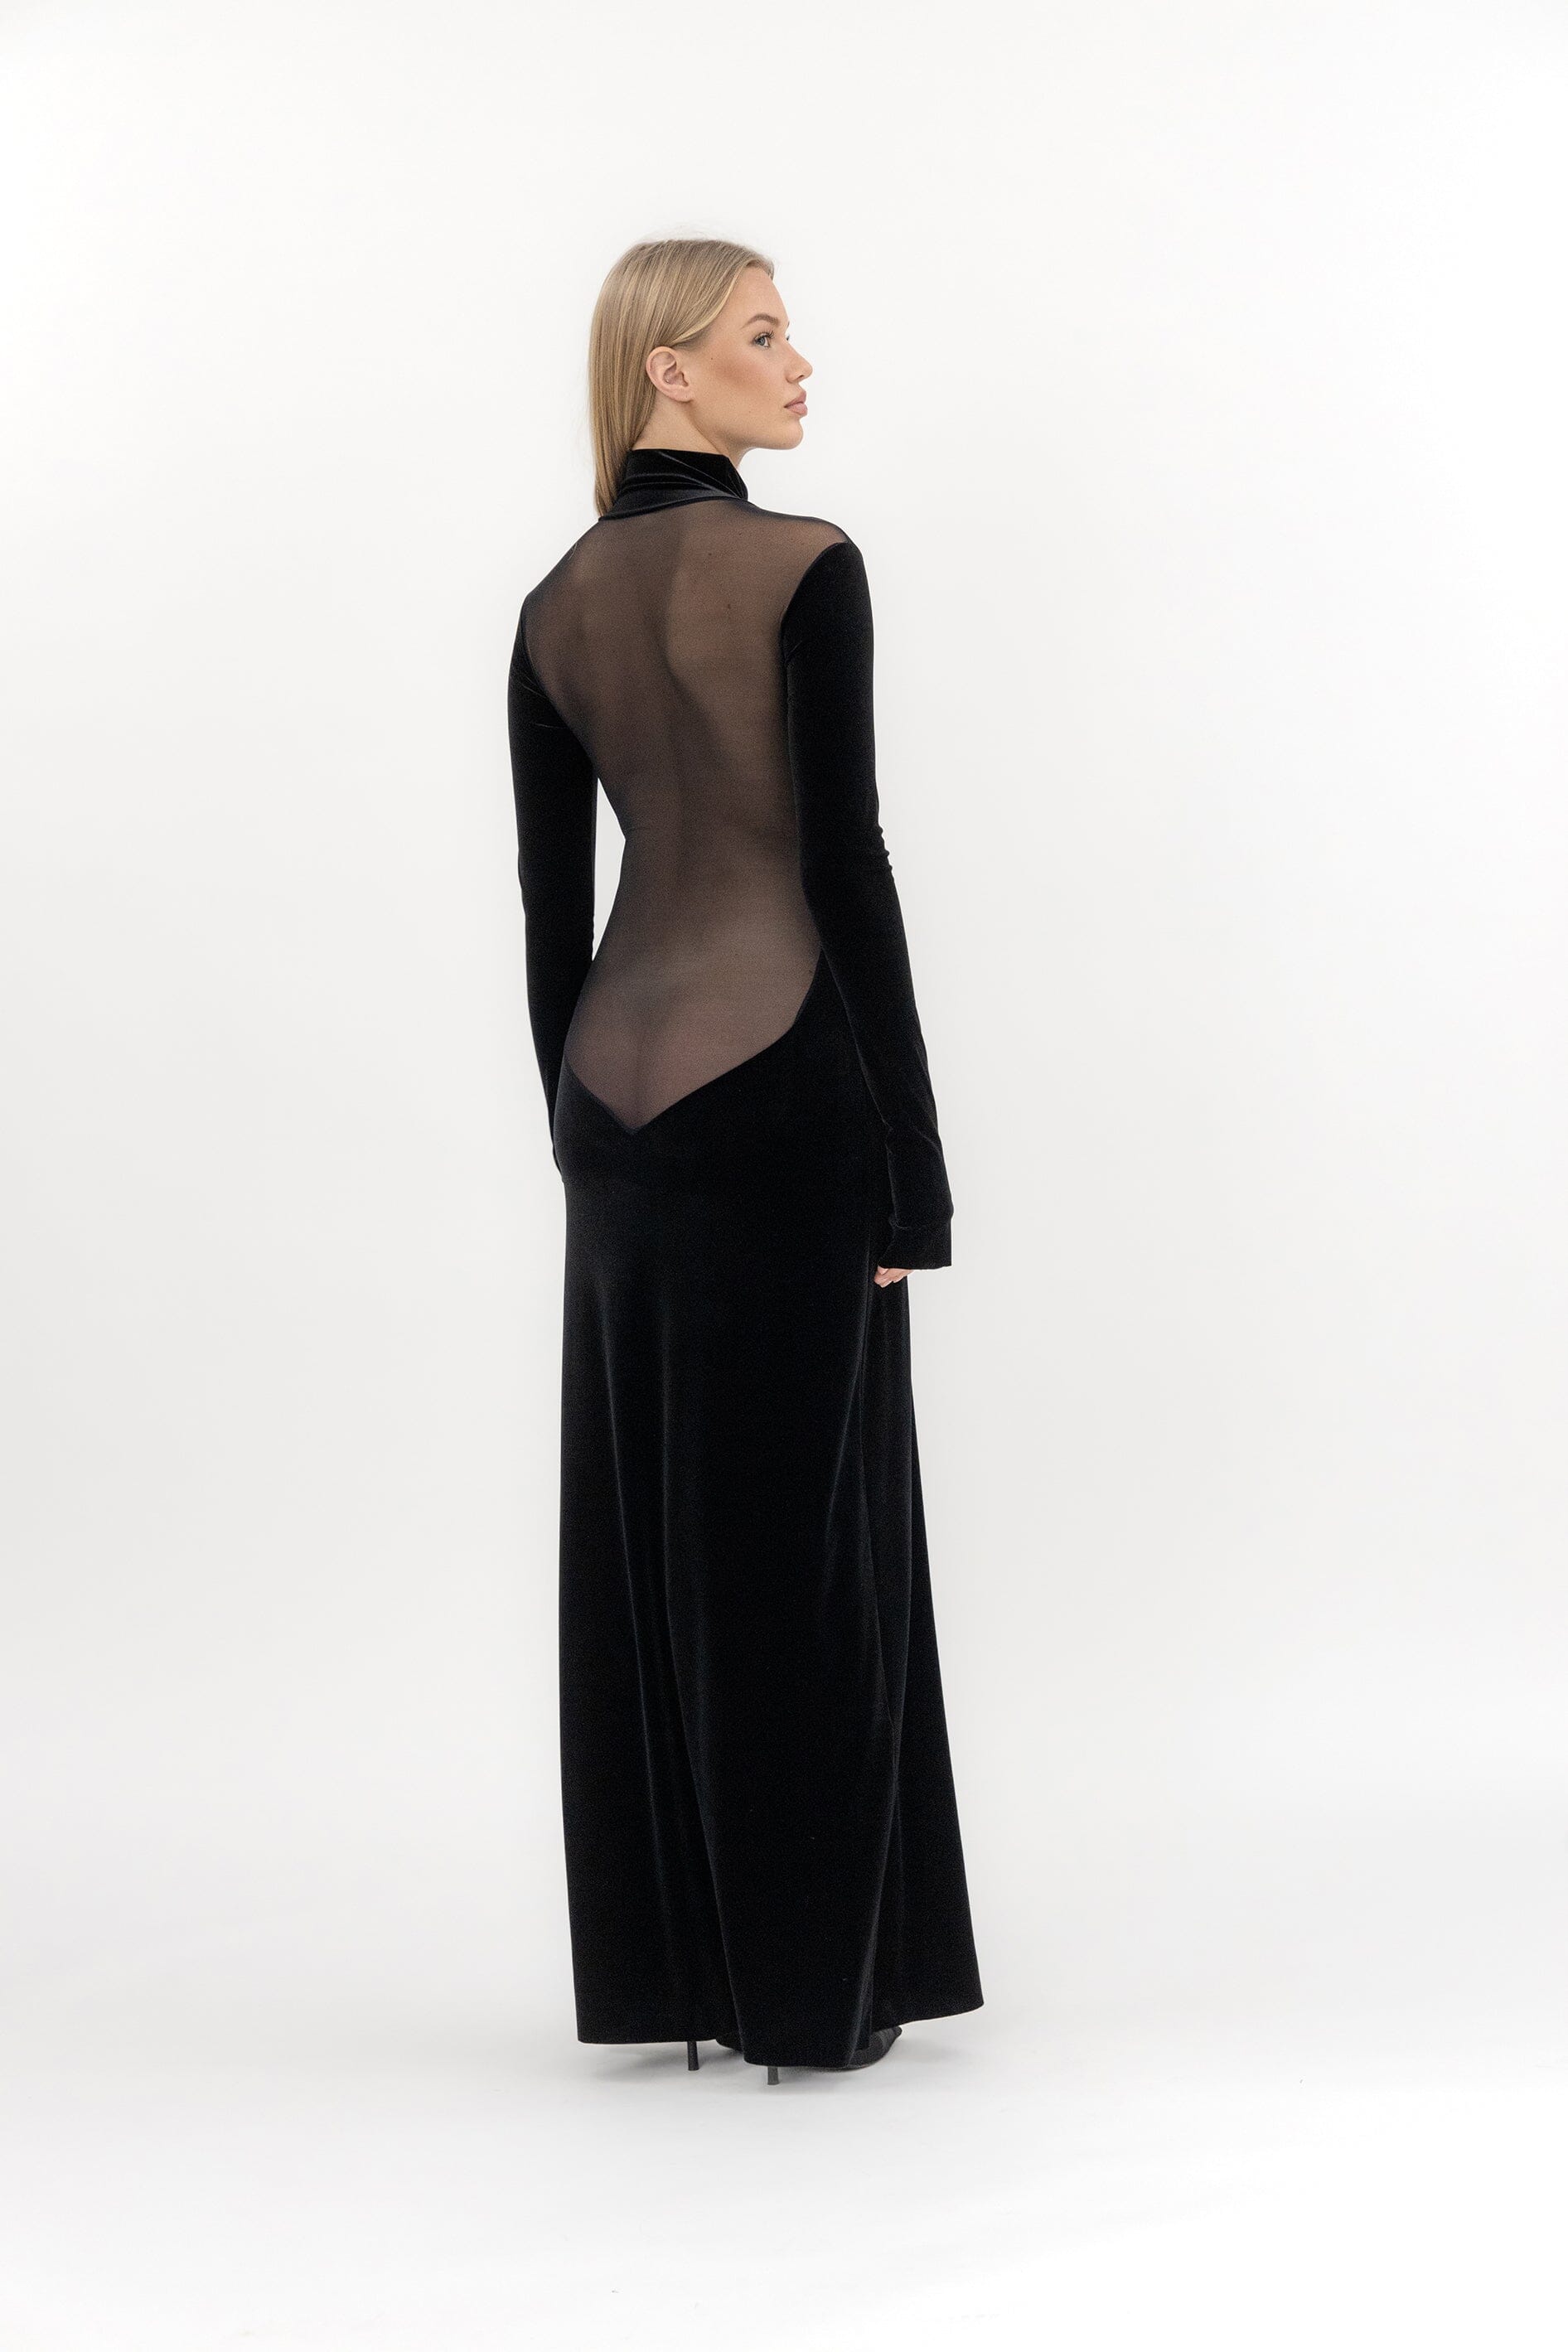  Say No More Gown Black Product SIA Glamoralle